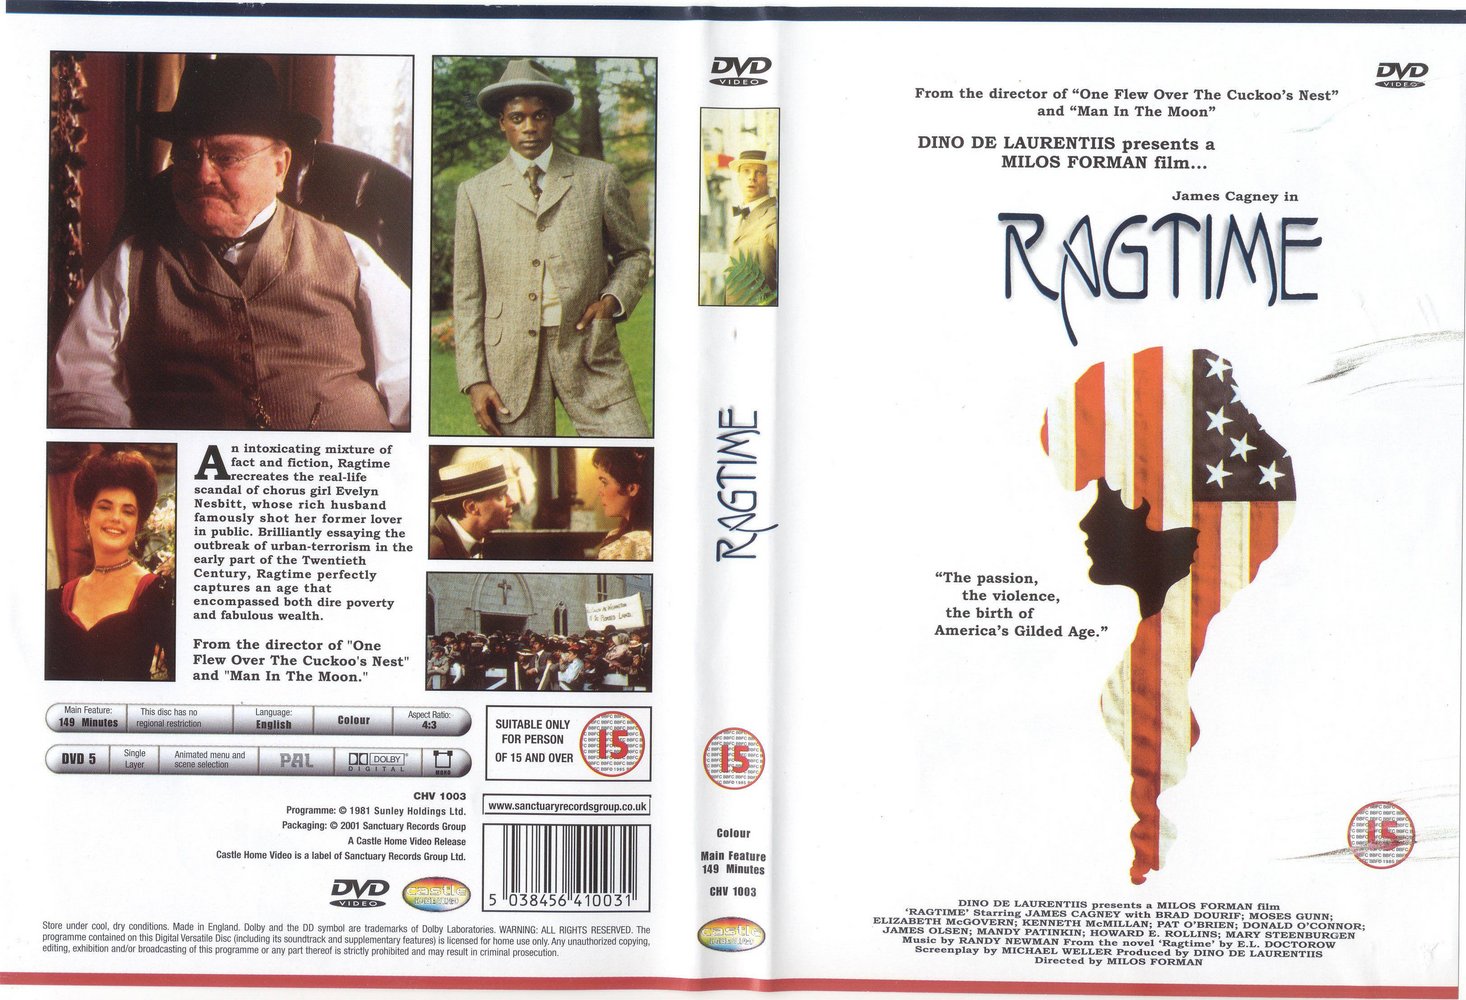 Jaquette DVD Ragtime